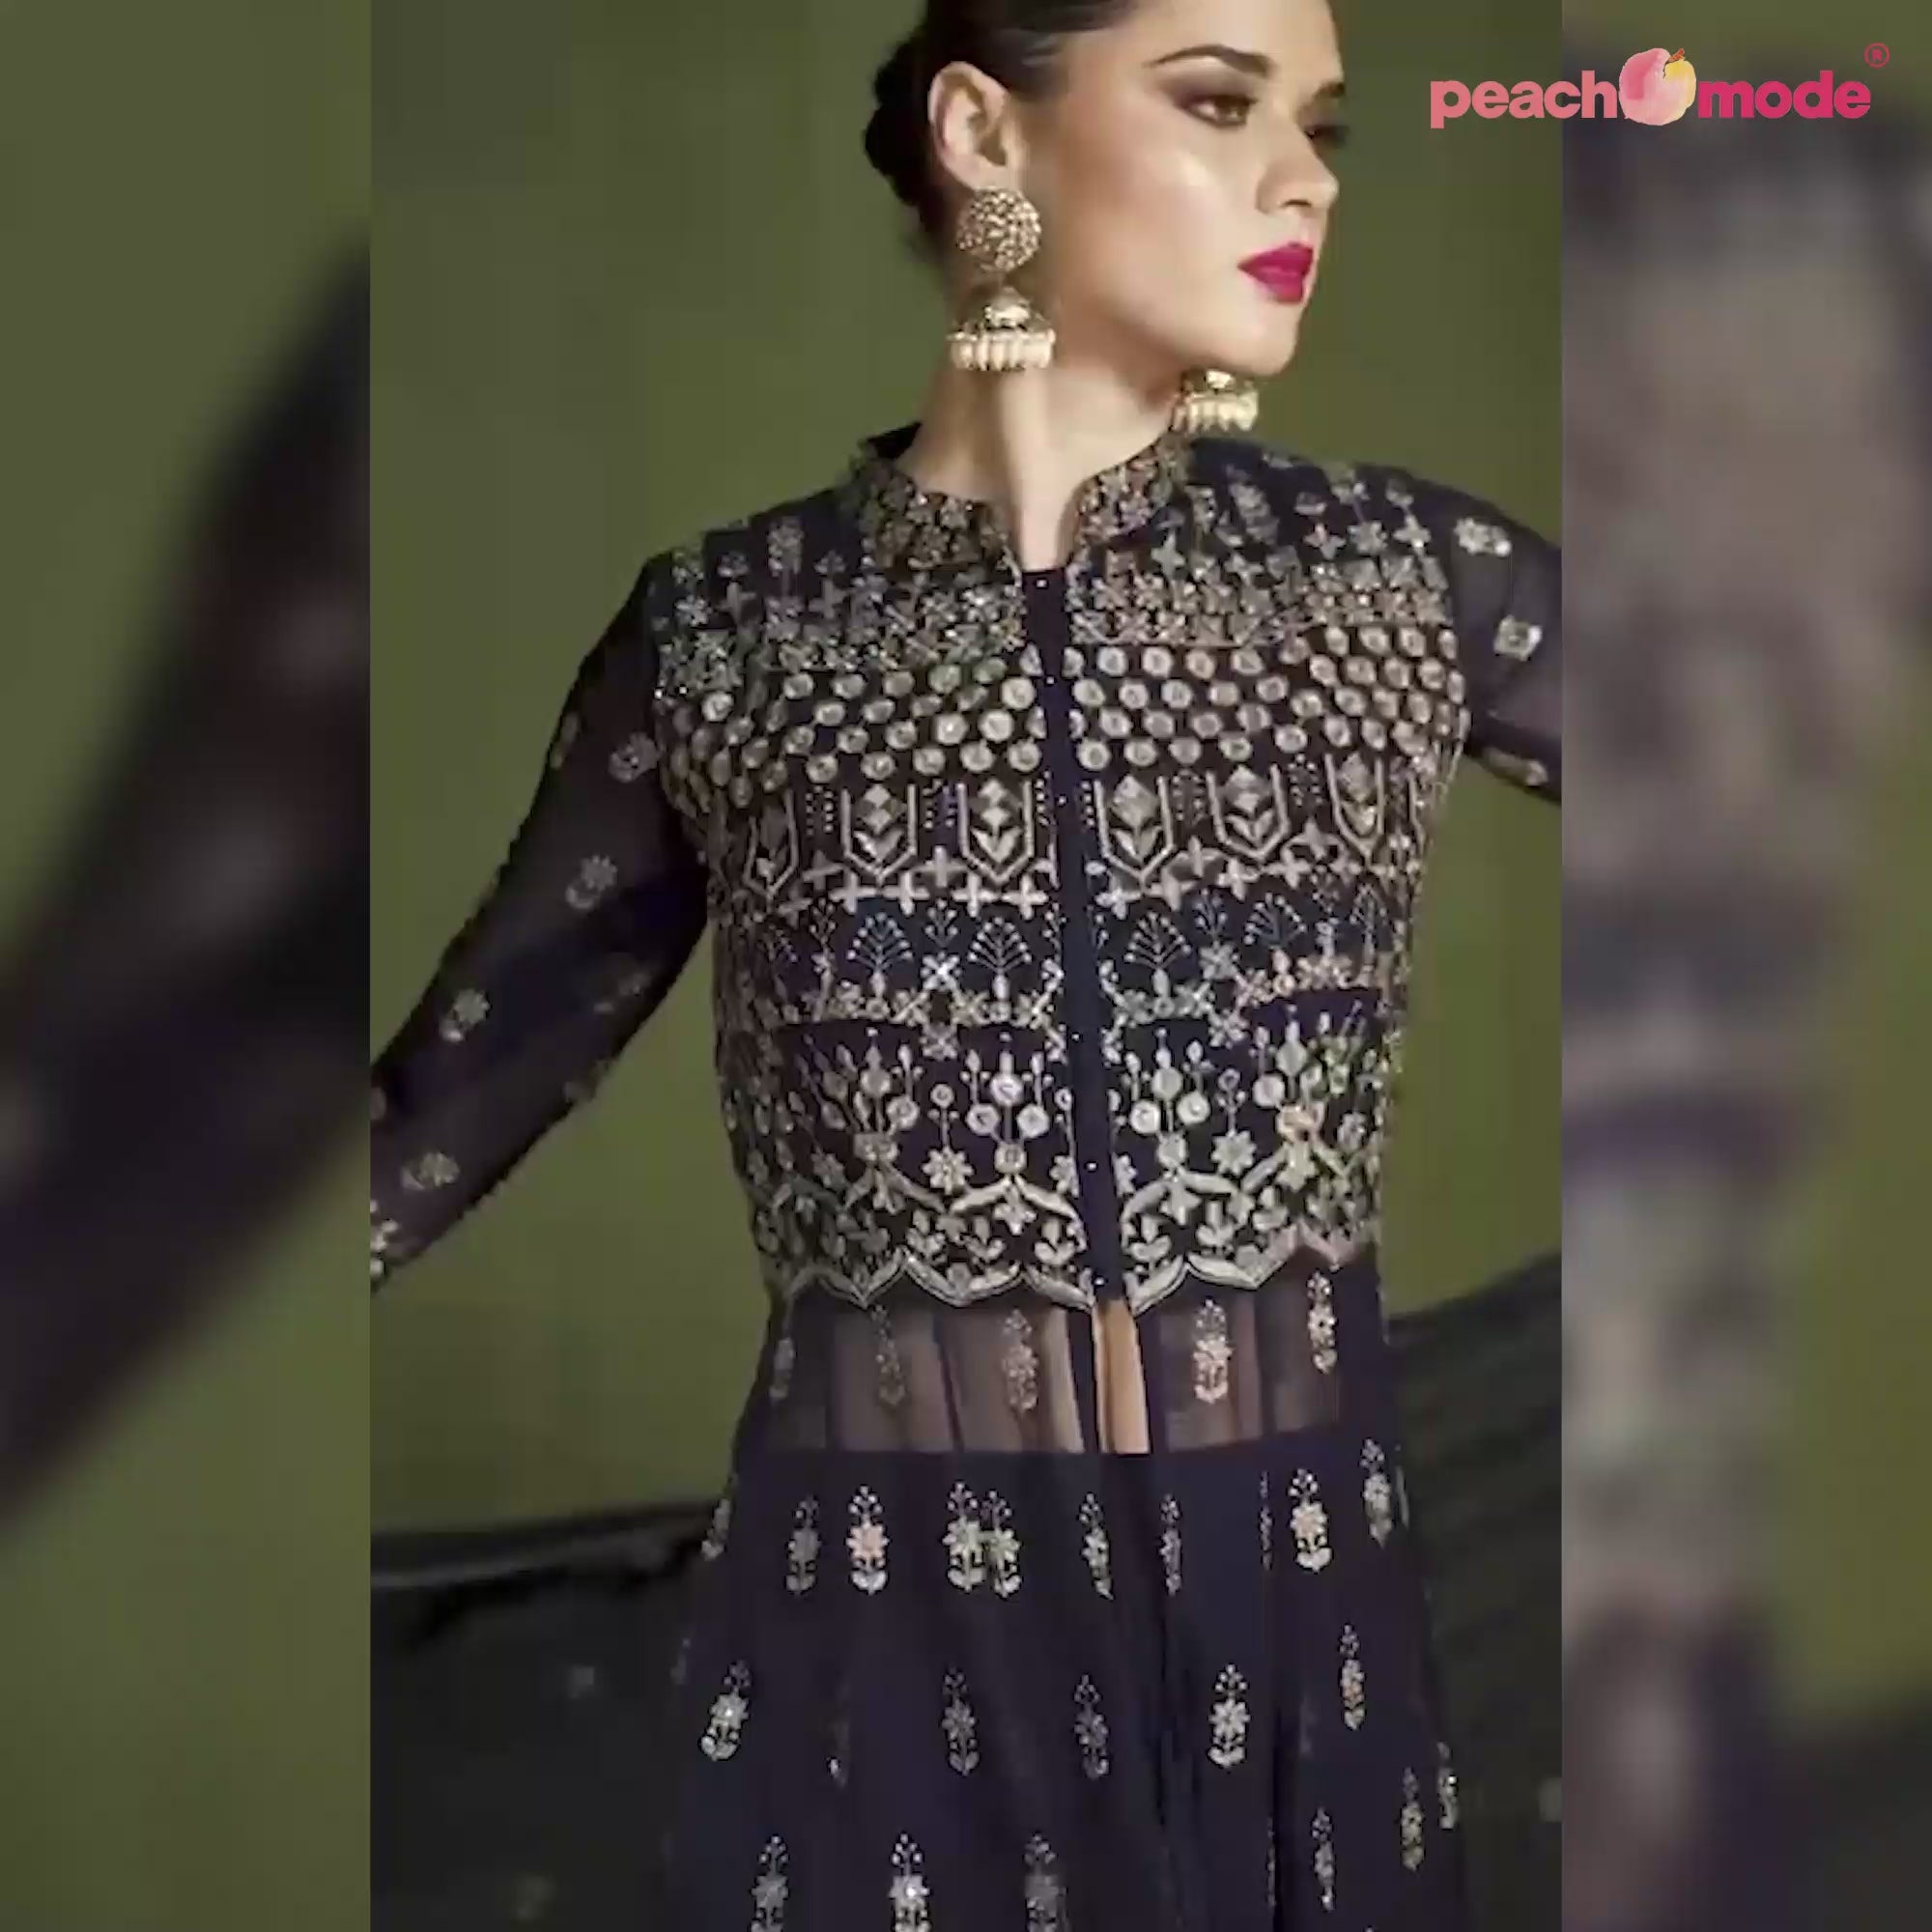 Navy Blue Embroidered Georgette Palazzo Suit